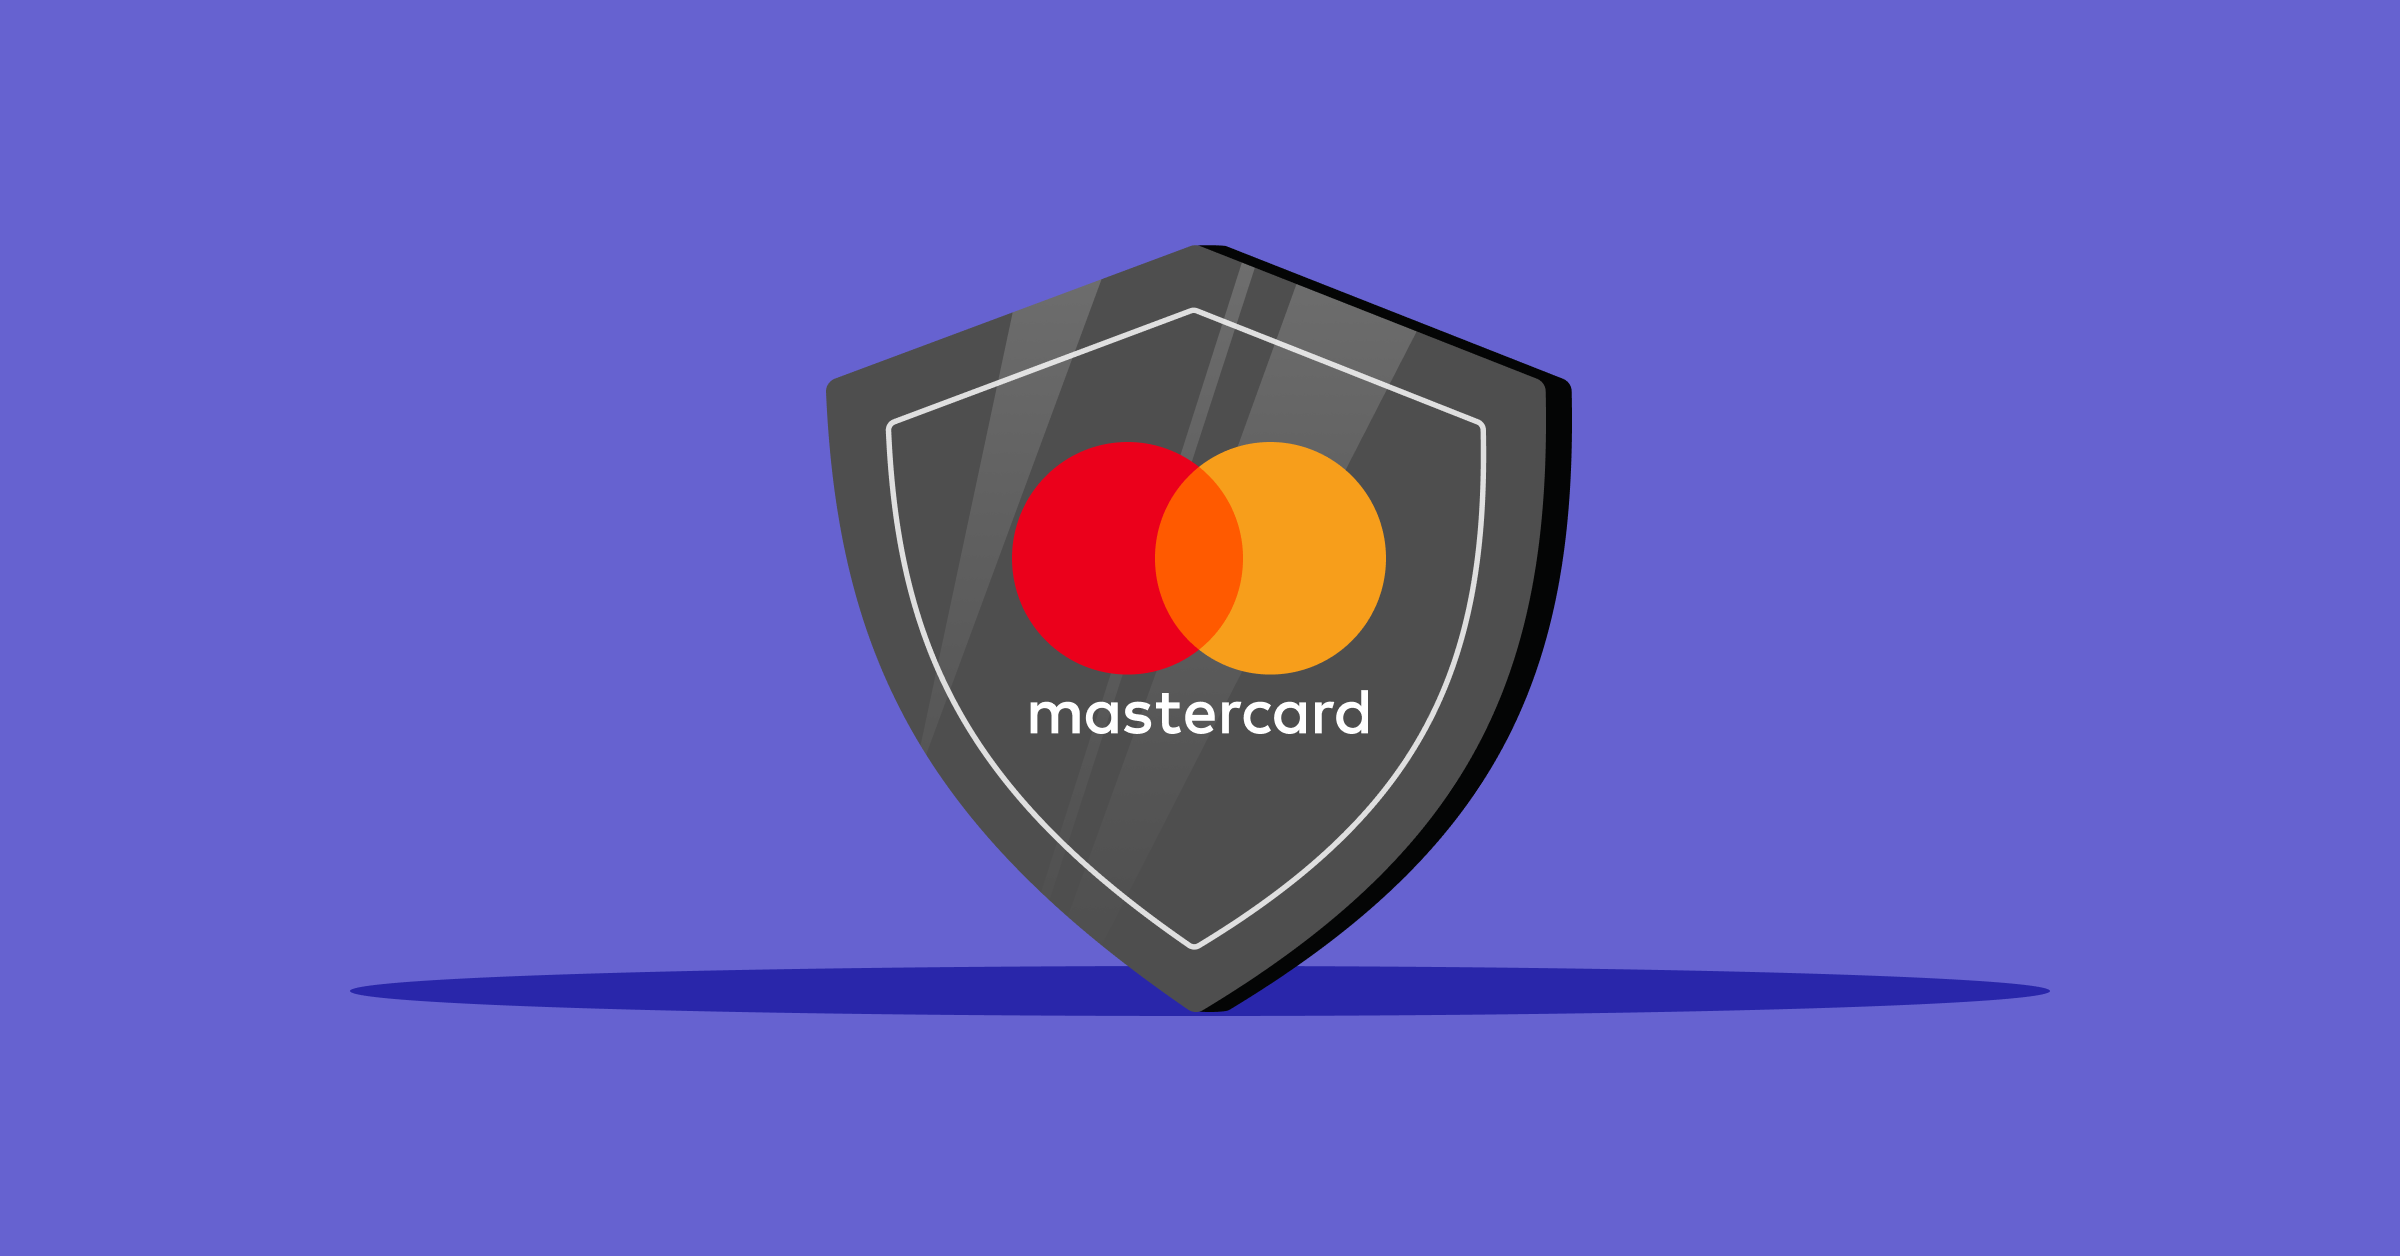 Mastercard enhanced the policy on free trials but only for physical goods